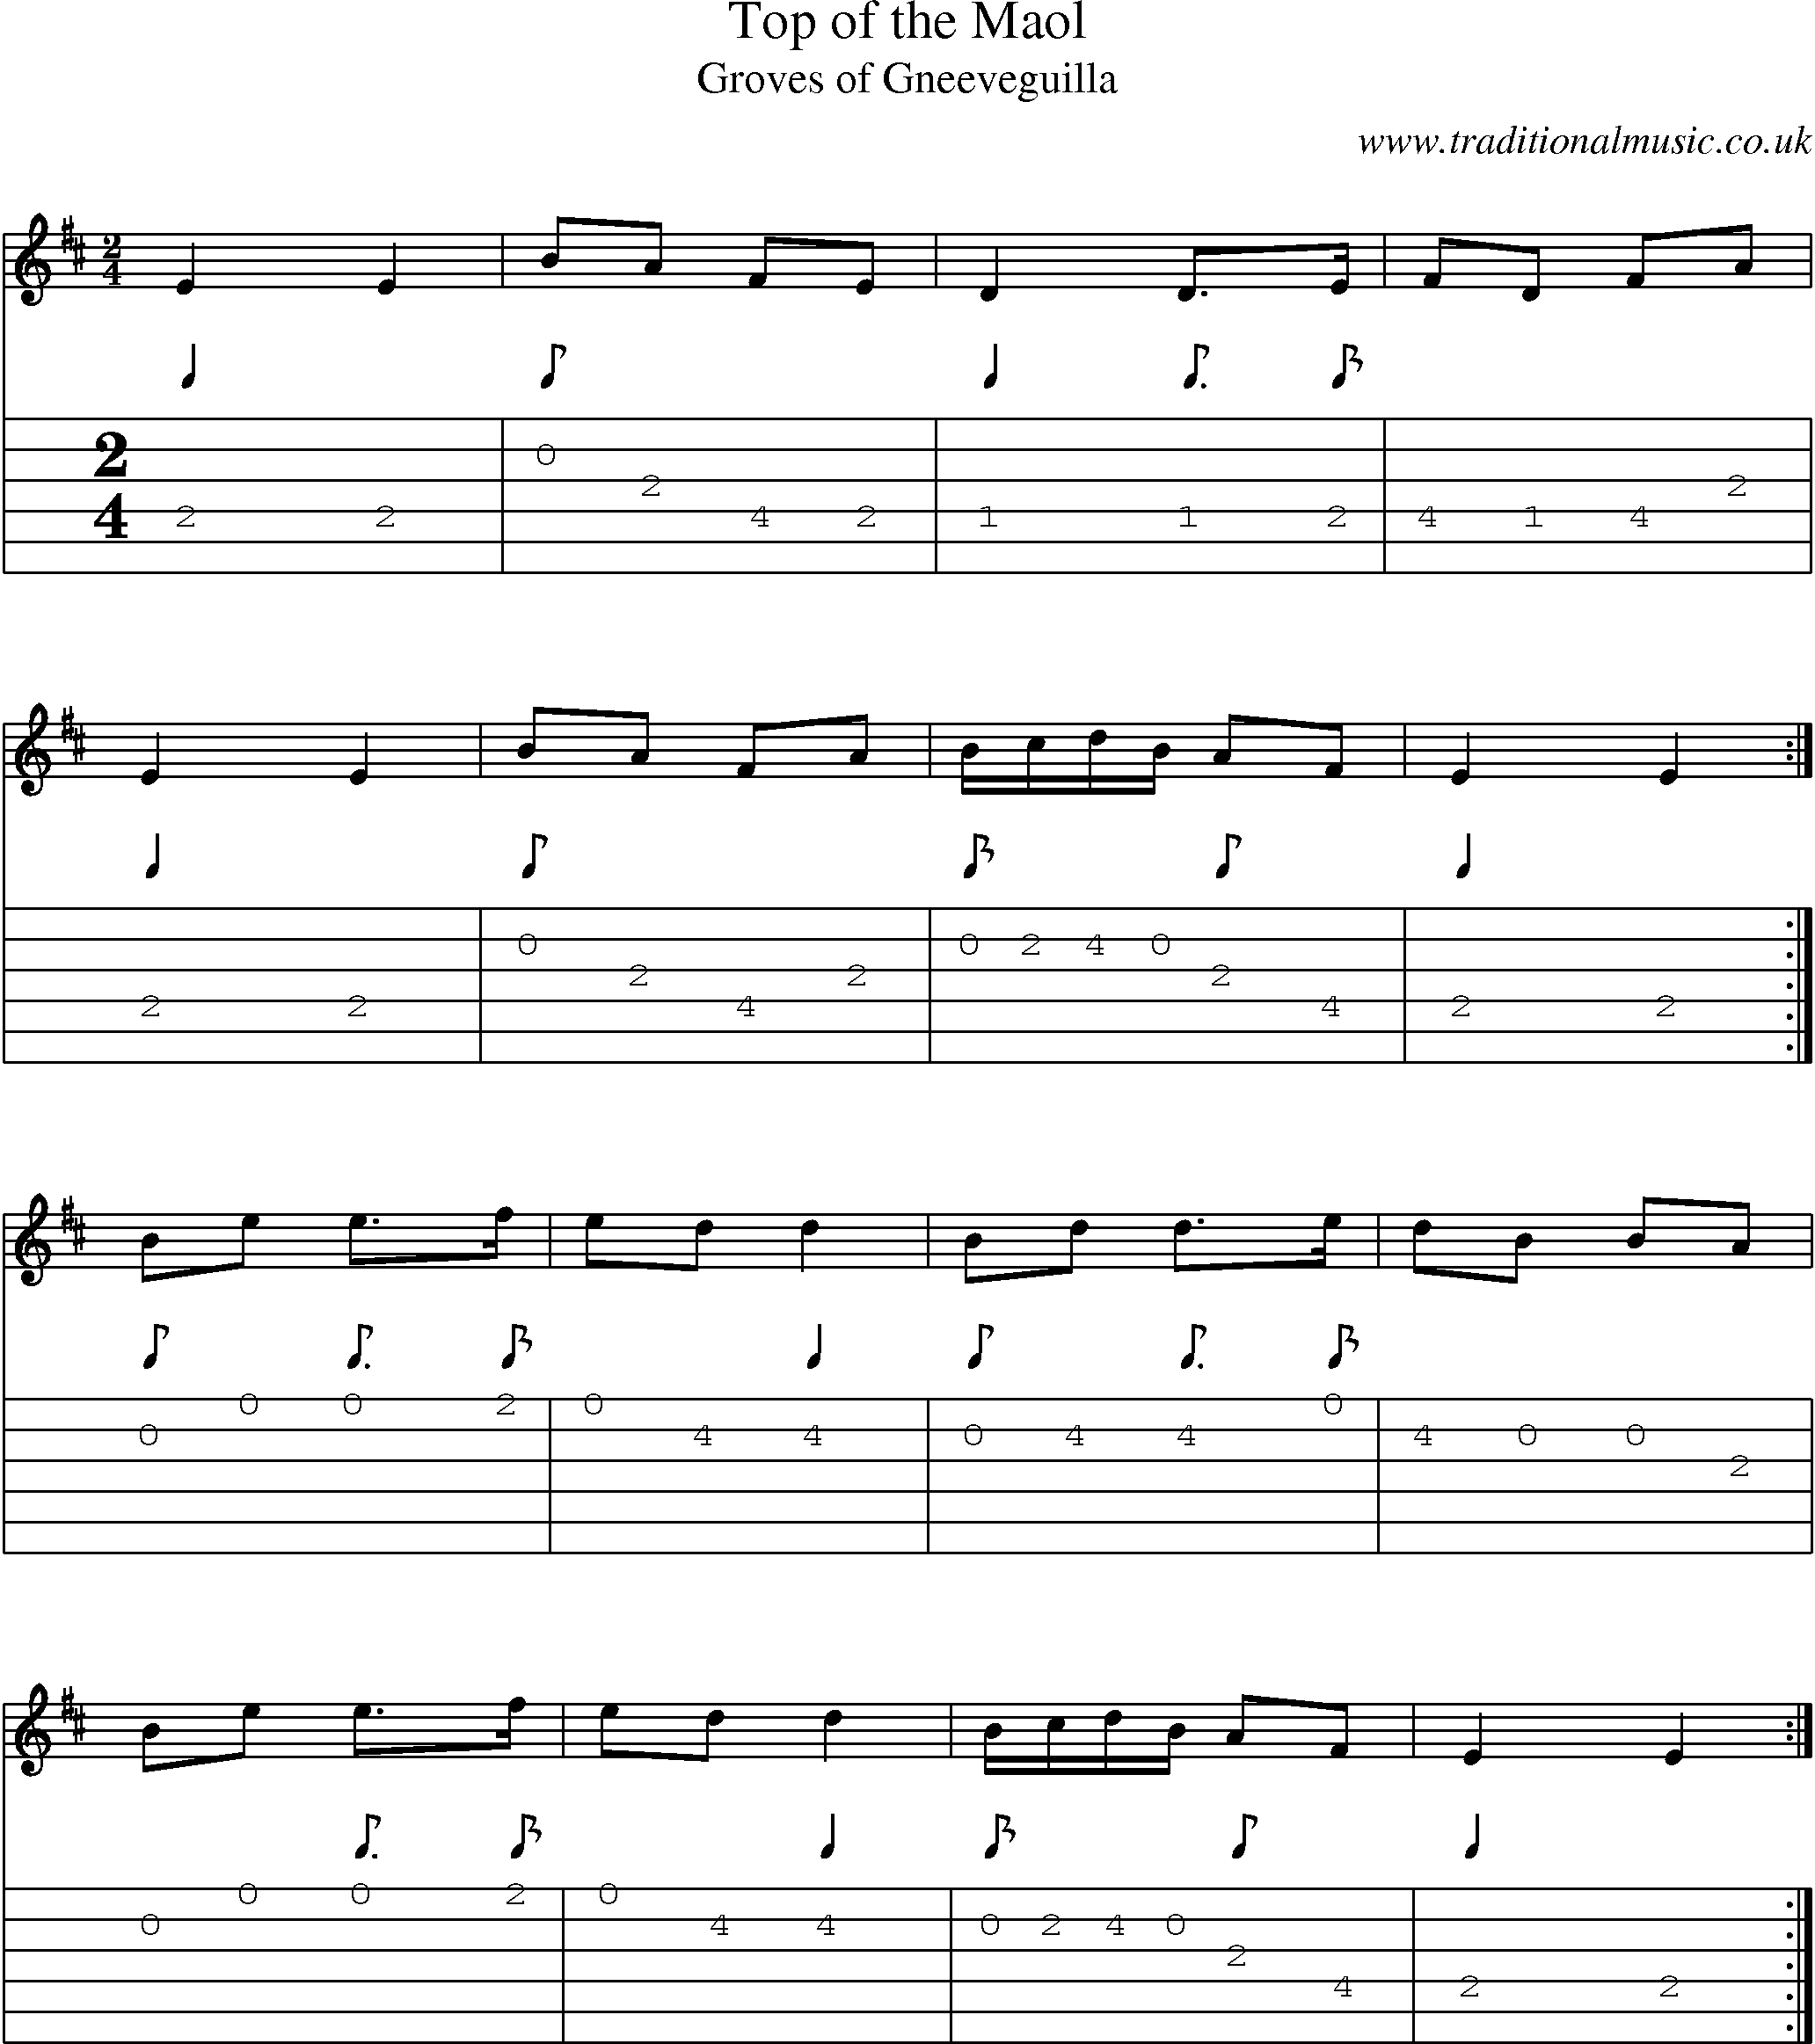 Music Score and Guitar Tabs for Top Of The Maol